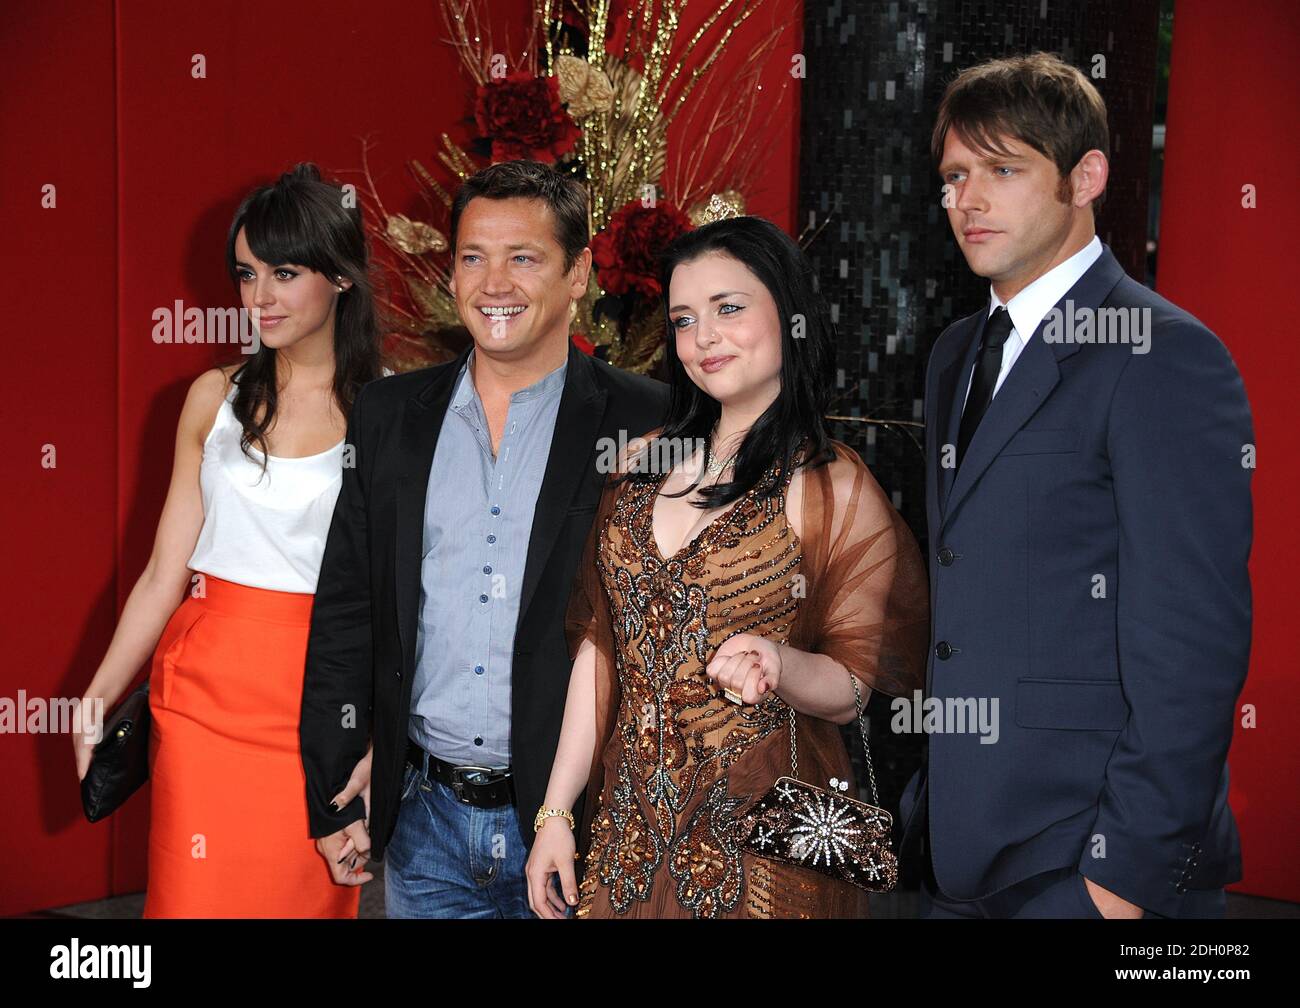 Shona McGarty (second right), Chris Coghill (right) and Sid Owen arriving for the 2009 British Soap Awards at the BBC Television Centre, Wood Lane, London. Stock Photo